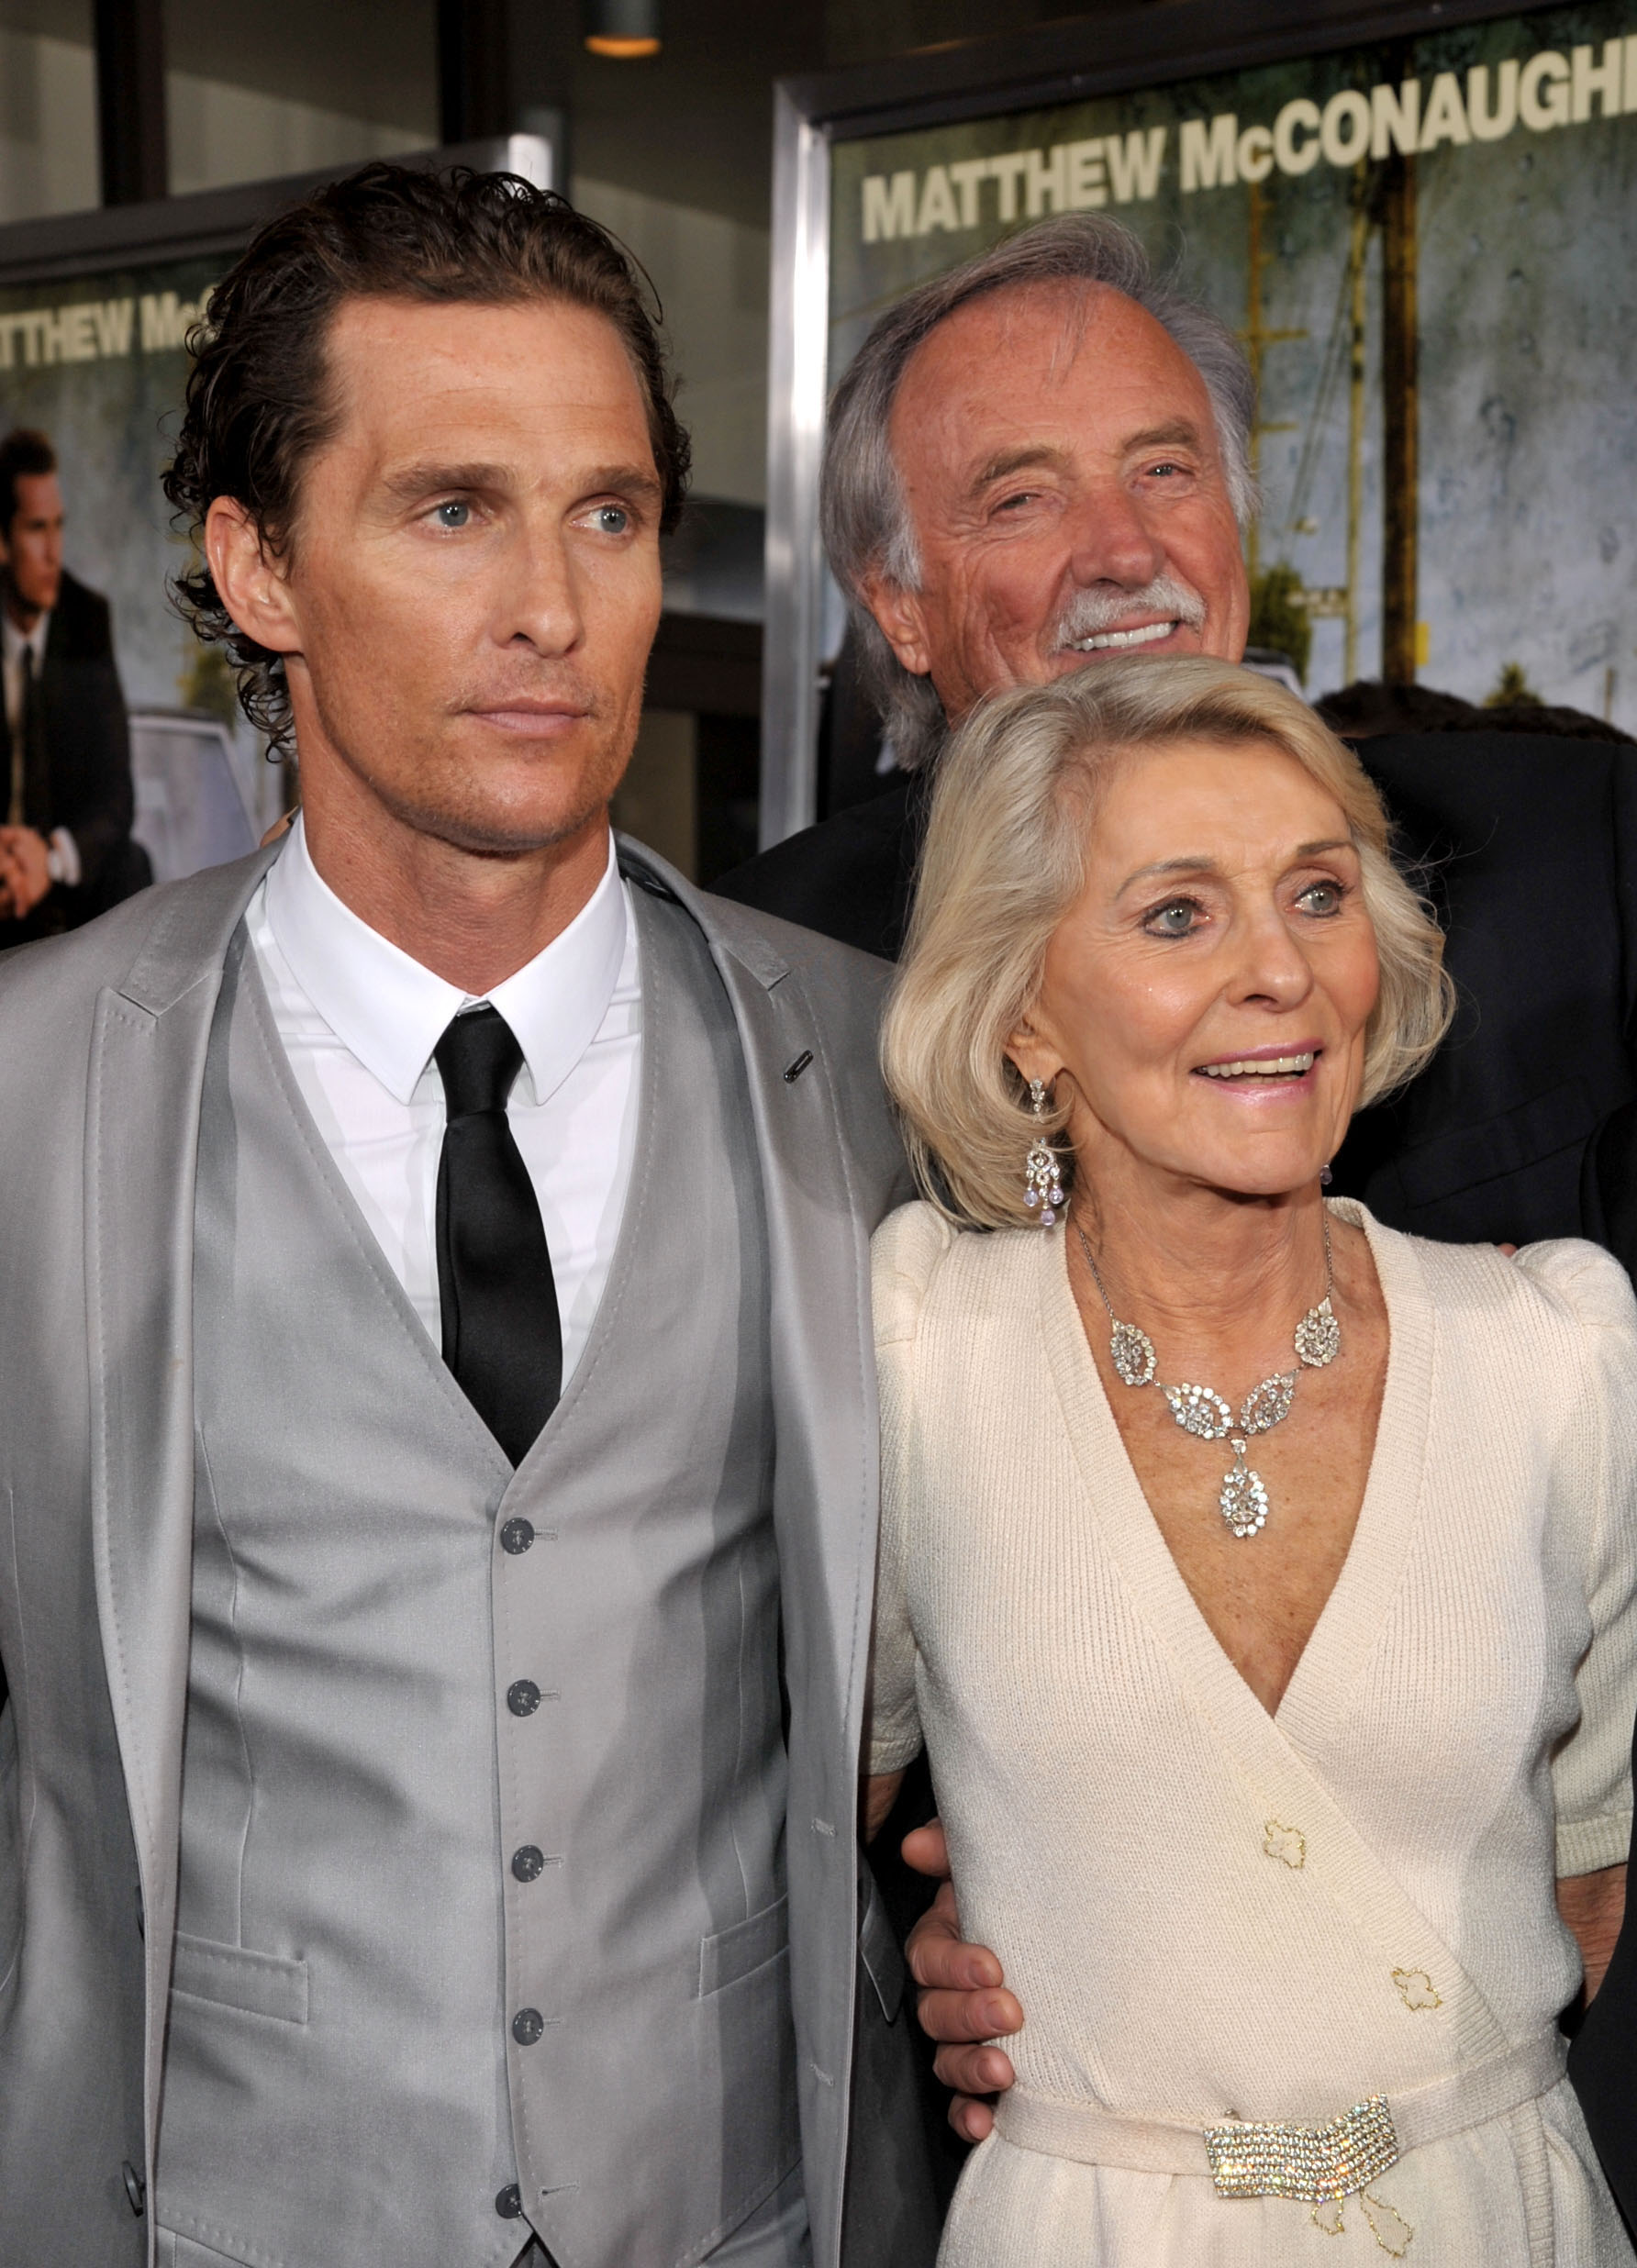 Matthew McConaughey Urged to Take DNA Test to Know If Dad Who Refused ...